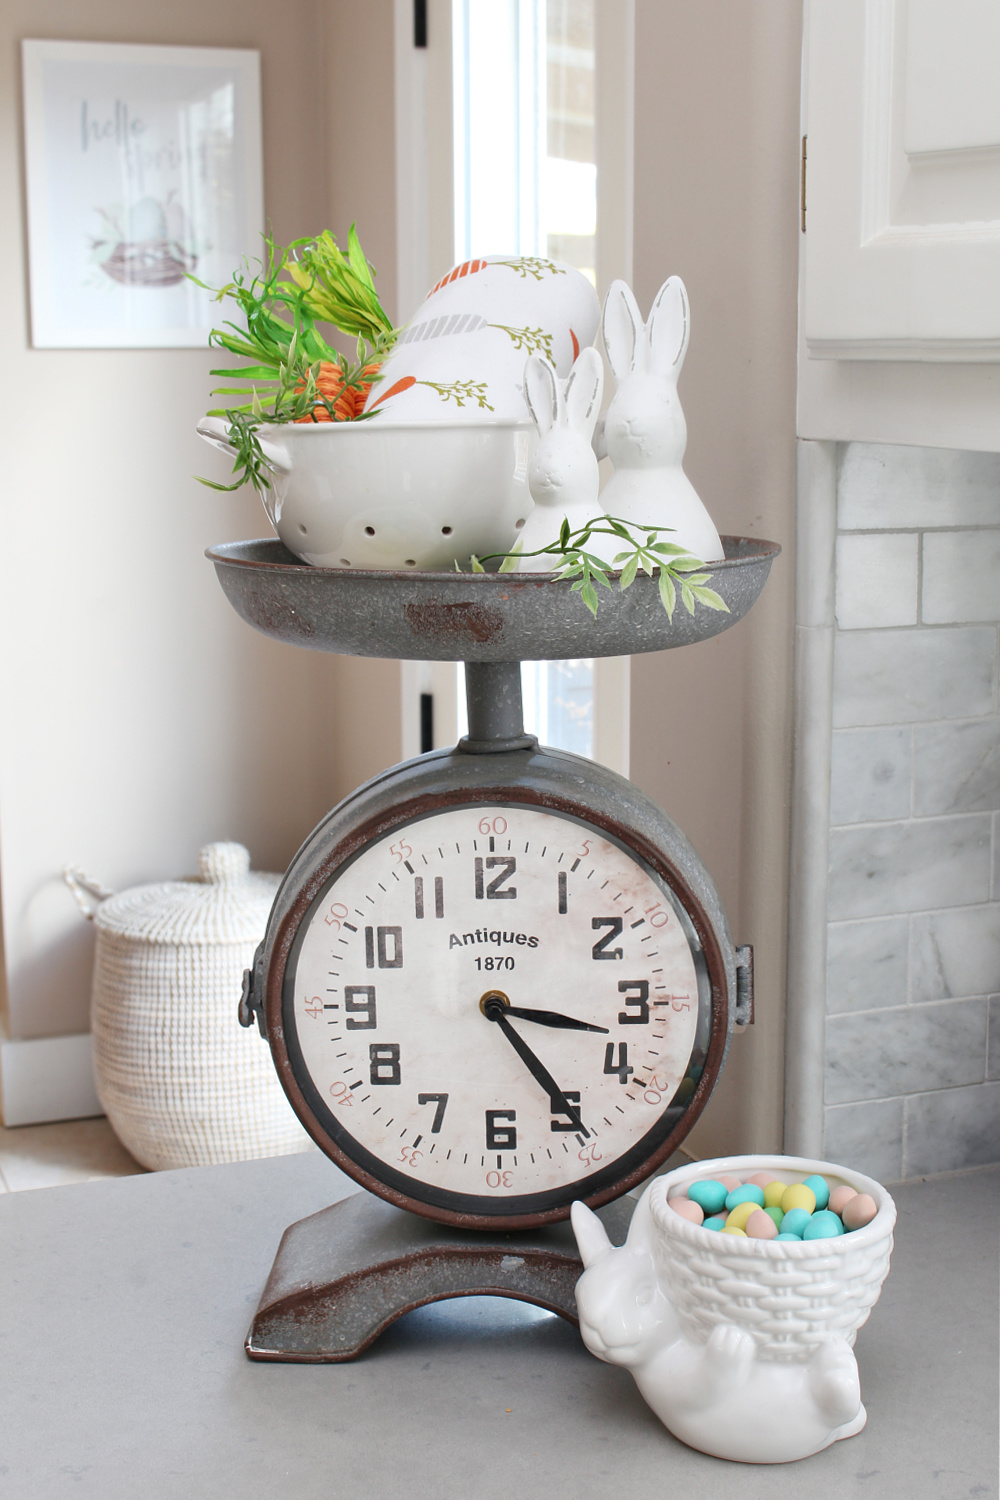 Simple Easter vignette in a kitchen.